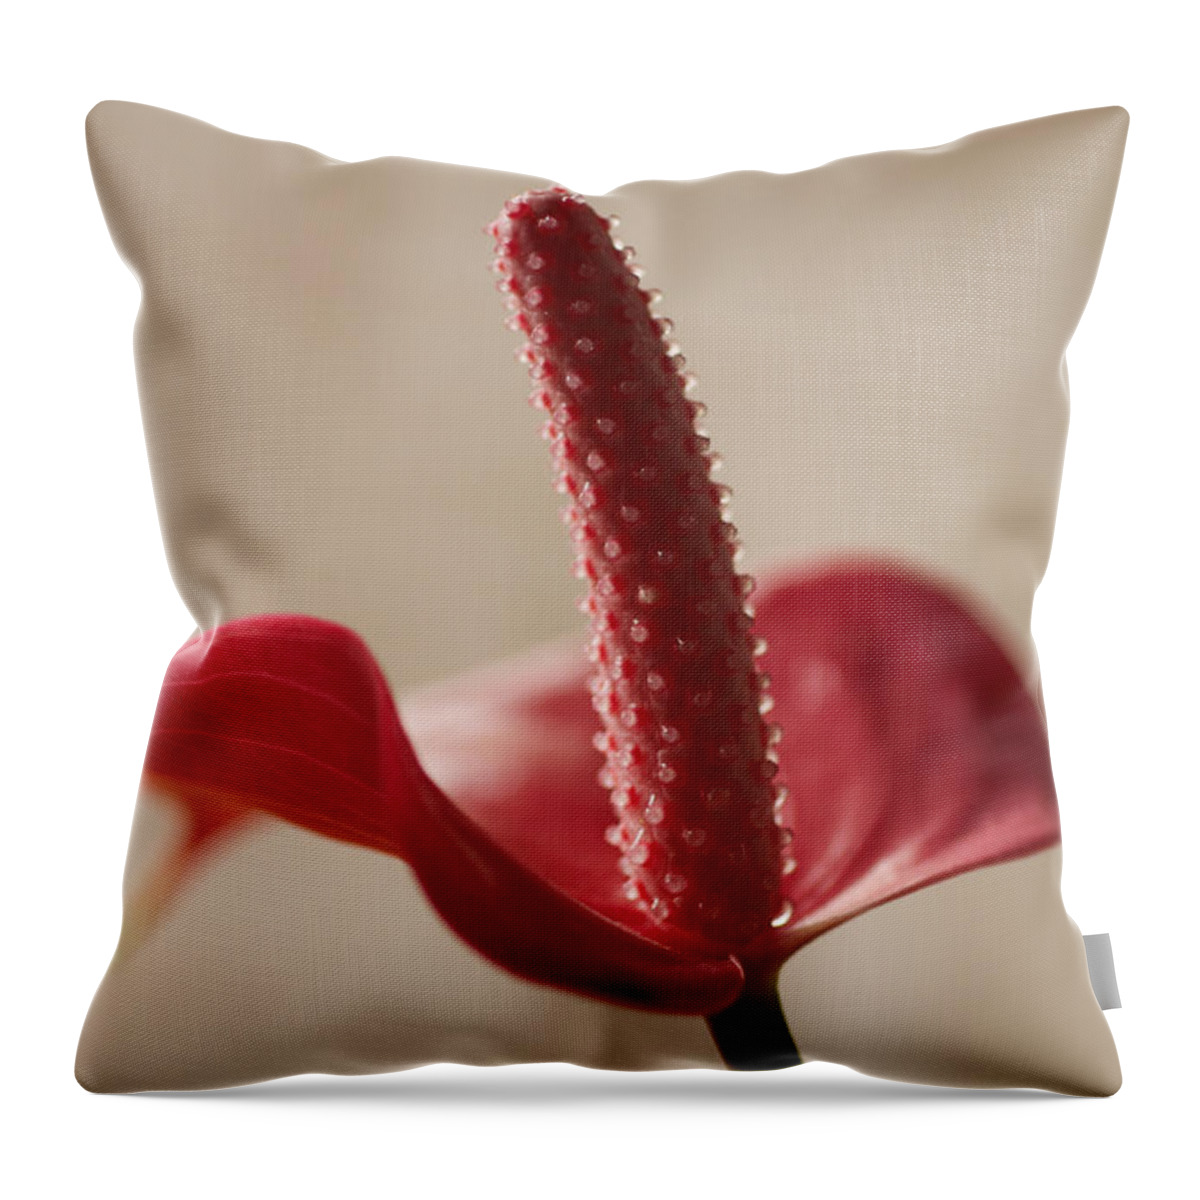 Flower Throw Pillow featuring the photograph Red Spathiphyllum by David Resnikoff